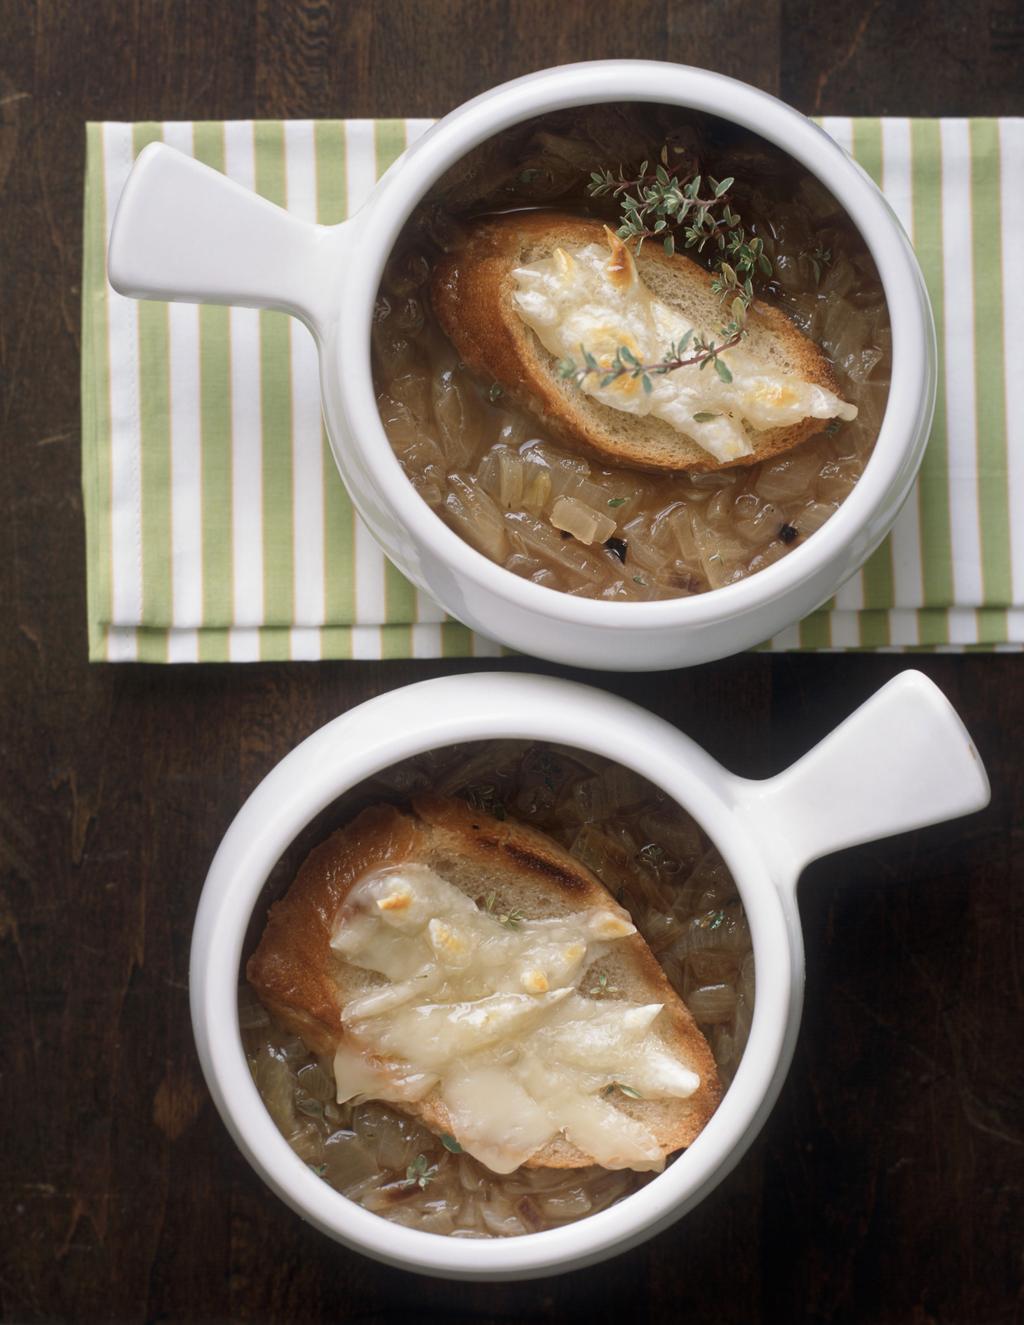 french onion soup Ingred ient s 6 large yellow onions 3 tbsp. extra-virgin olive oil, plus extra 14 oz chicken stock 10 oz beef stock 2 tbsp.